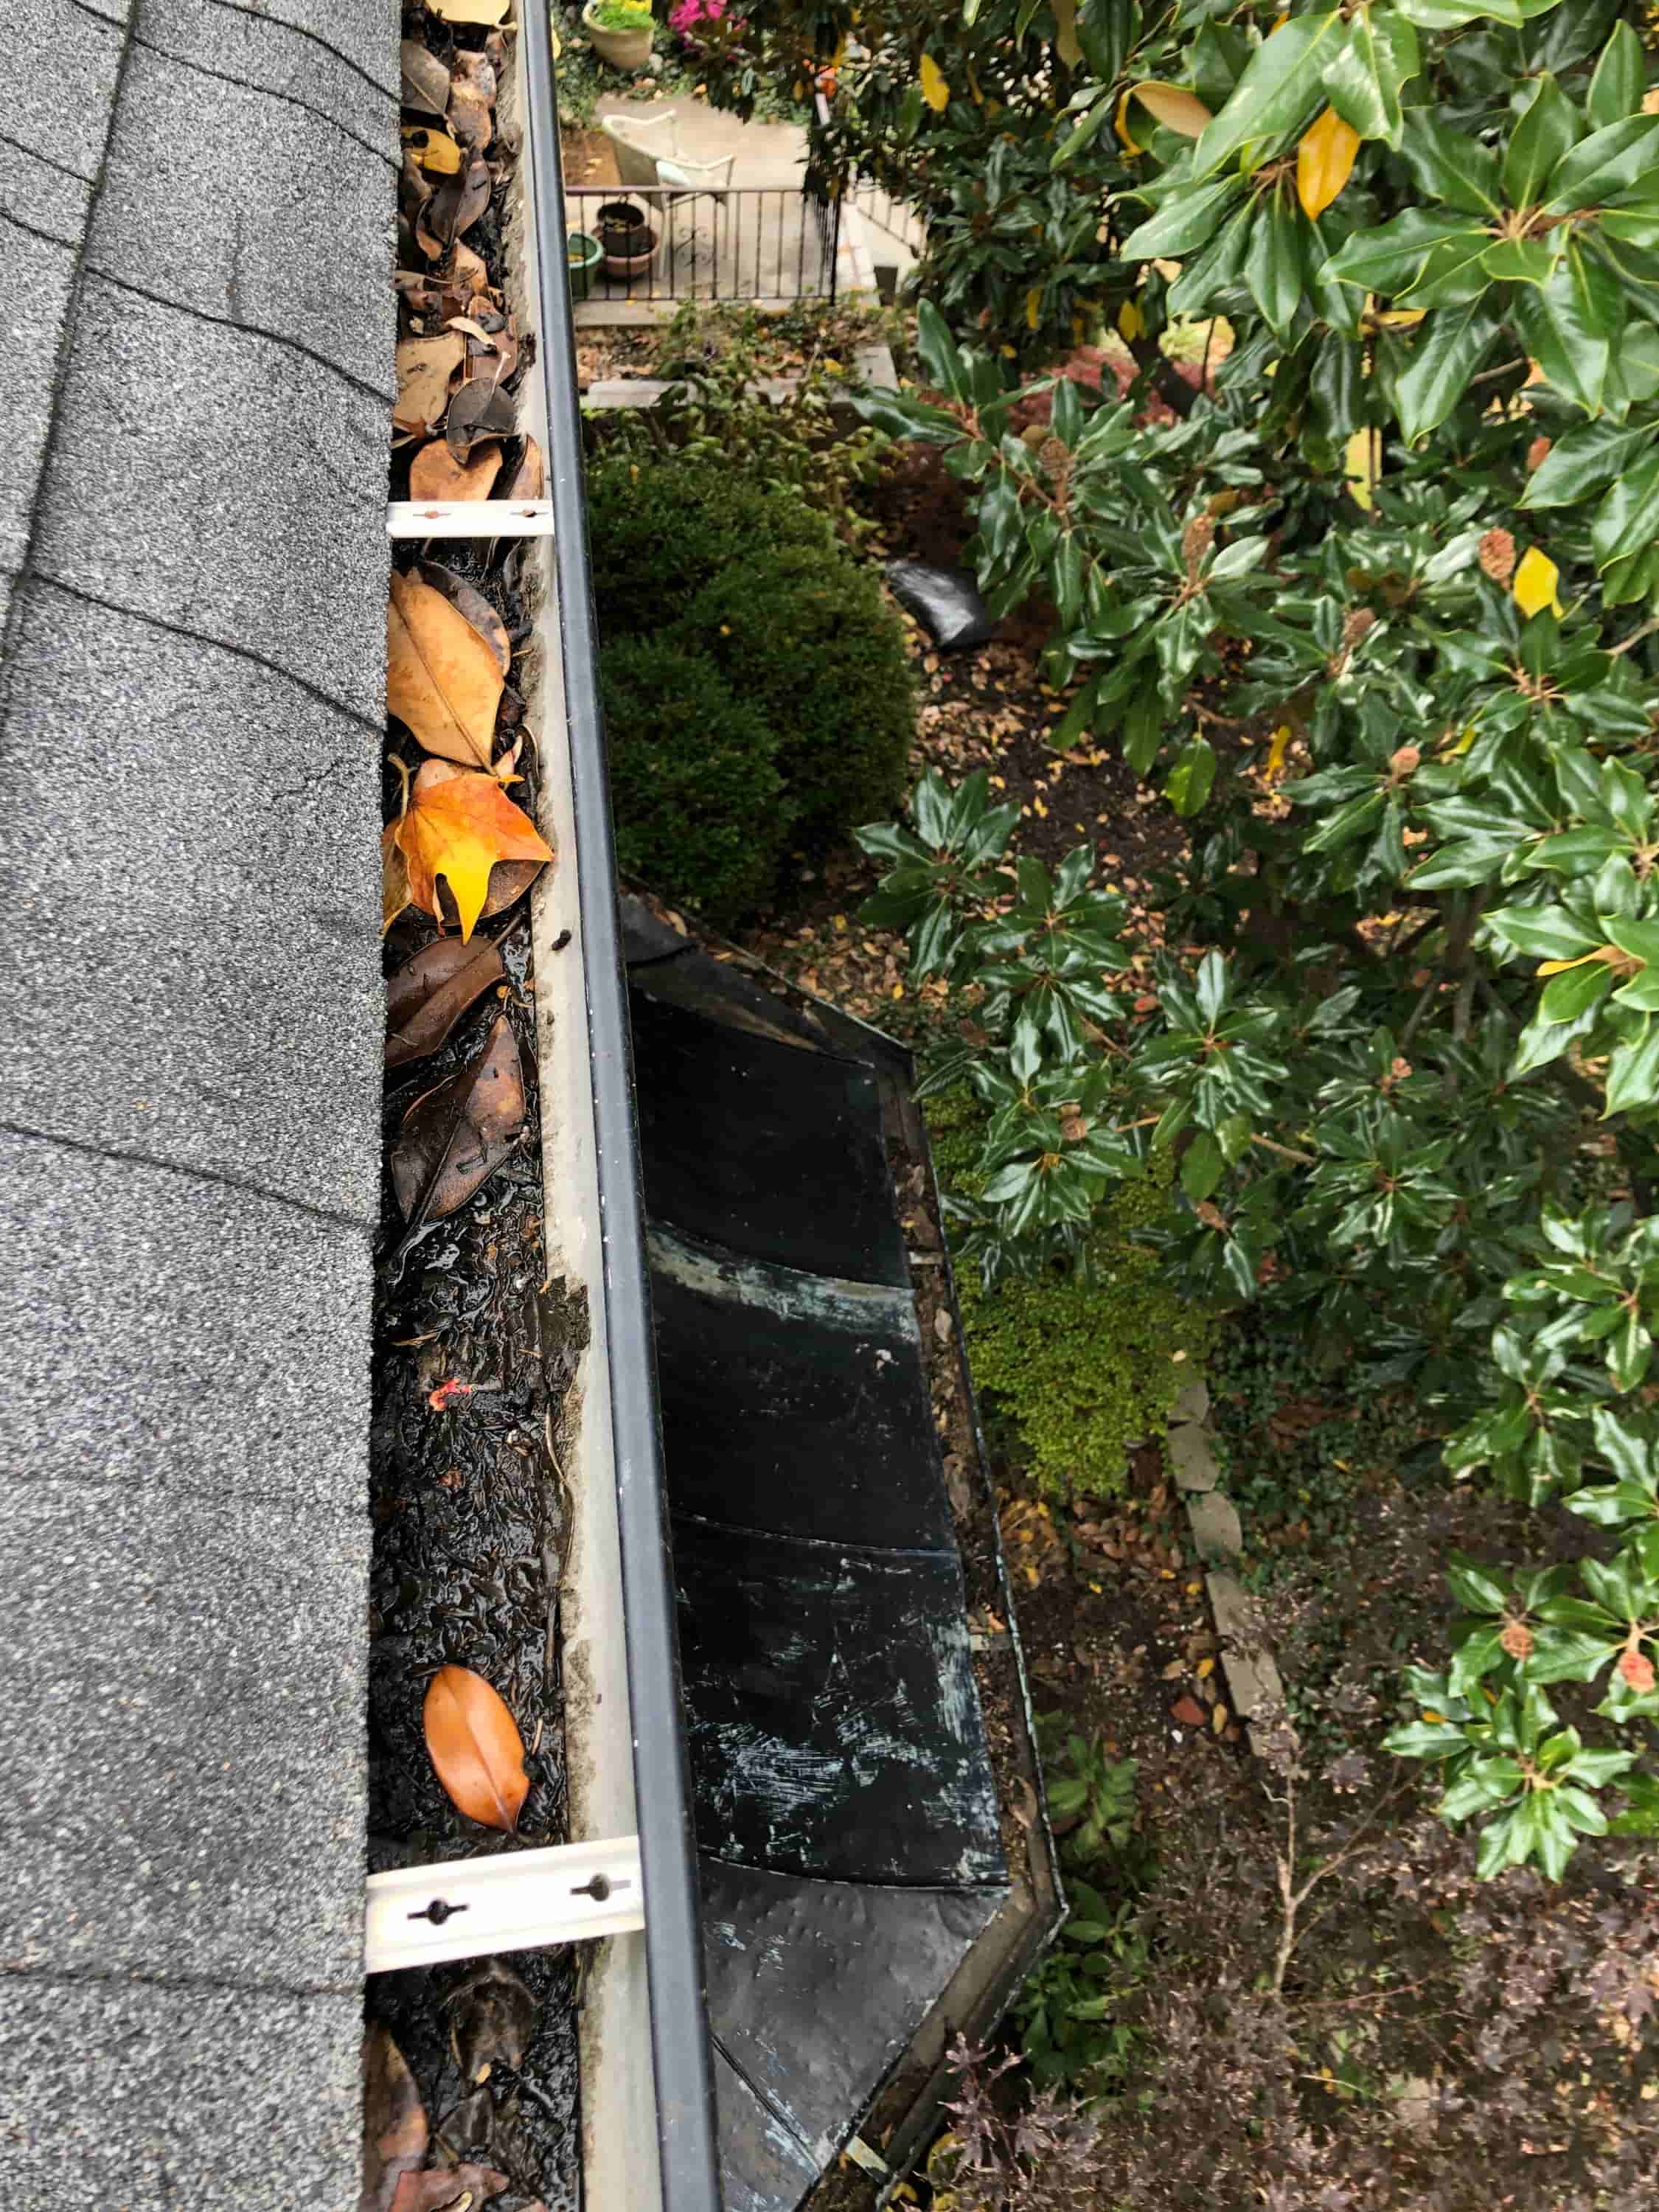 cleaning out gutter drains